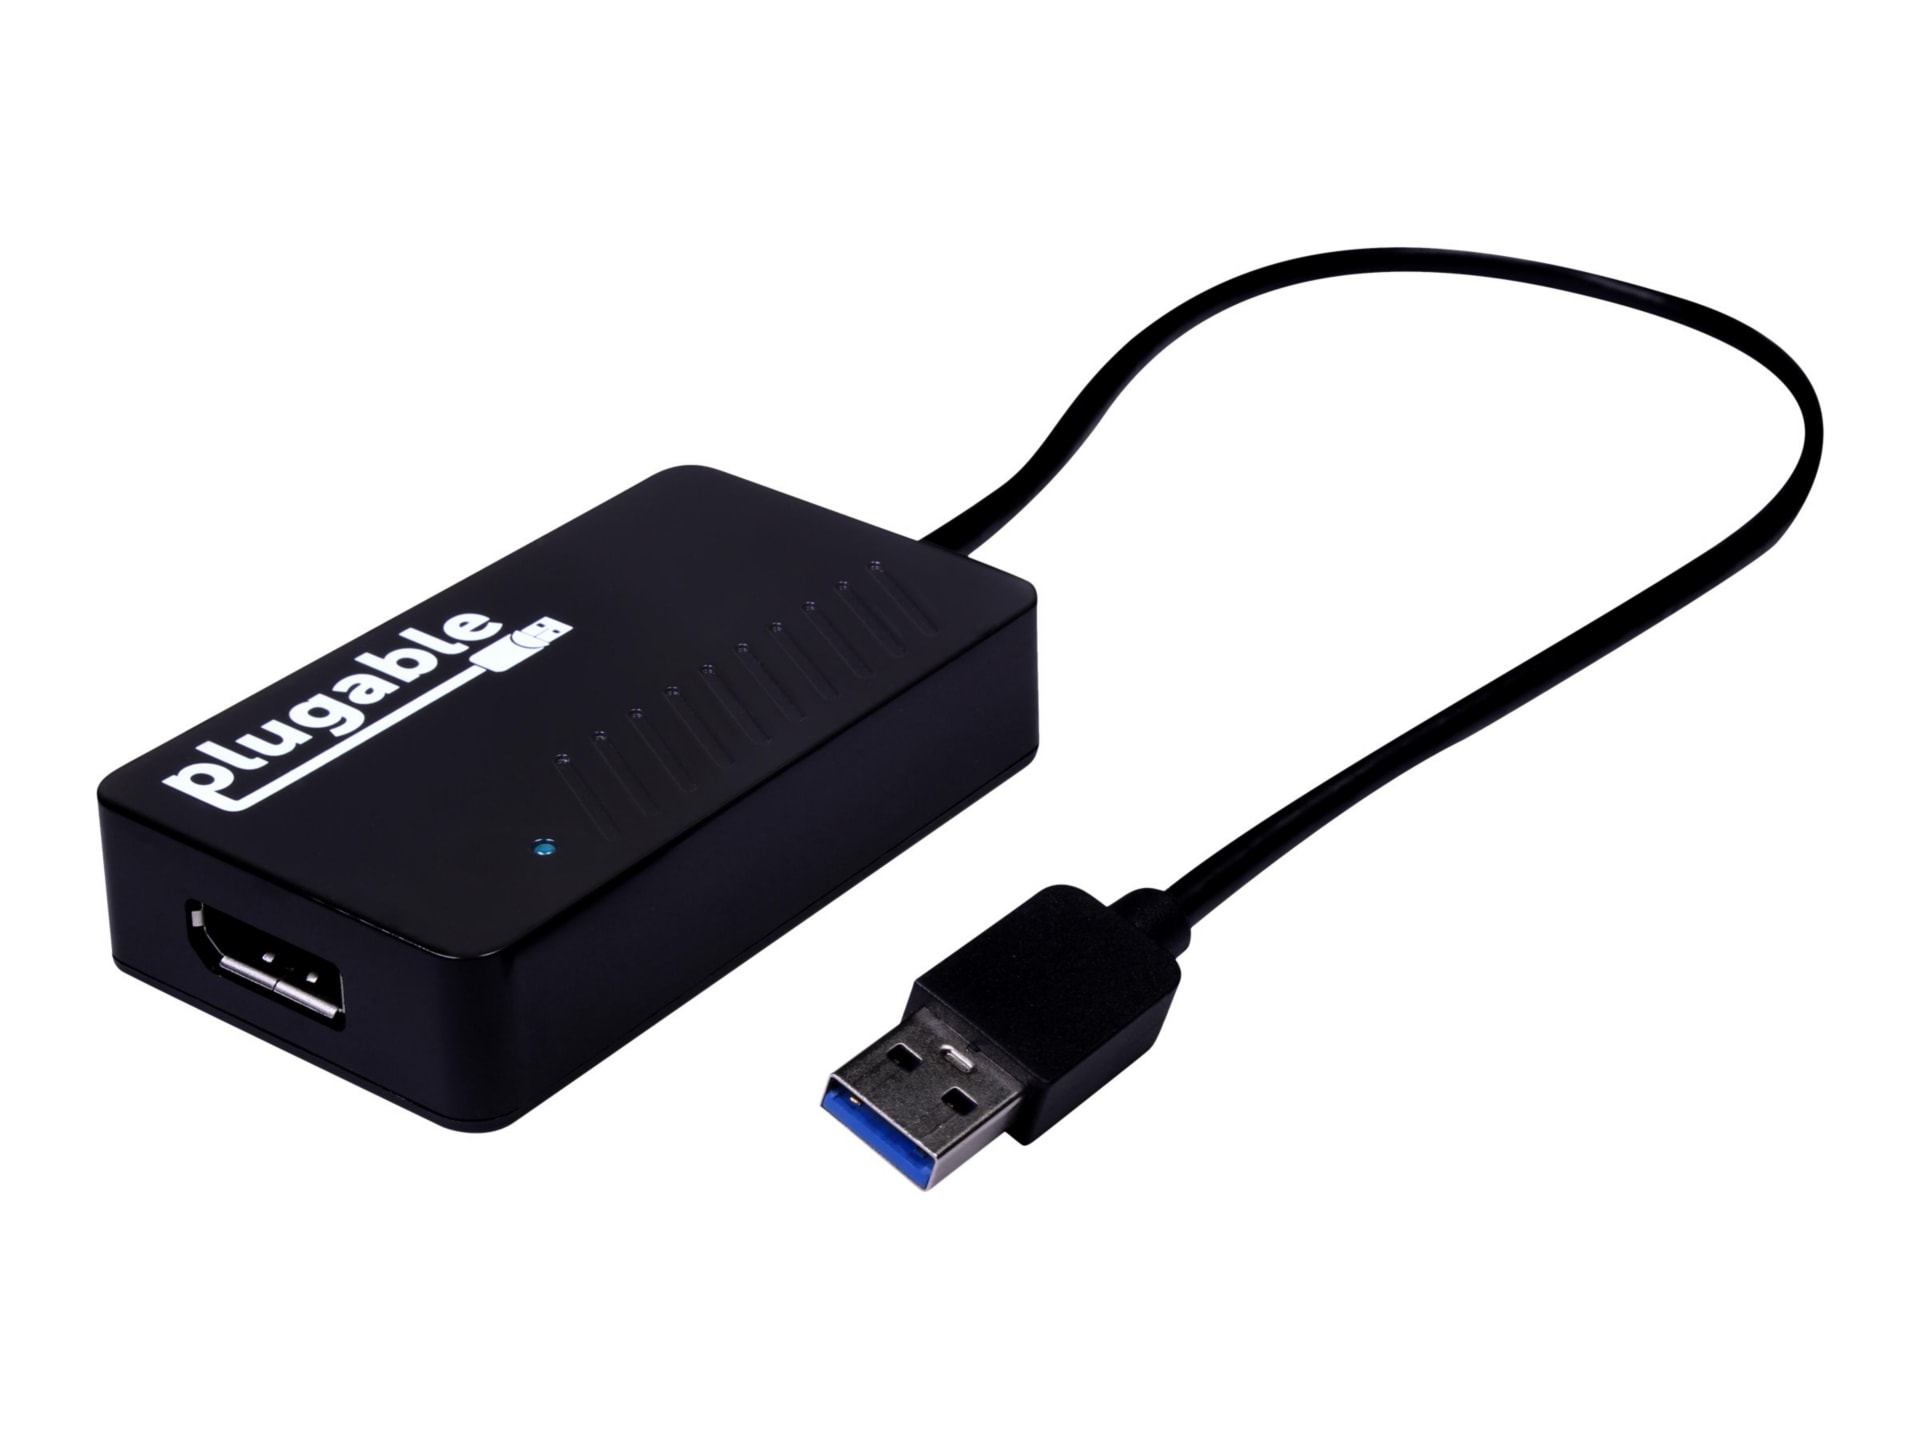 Plugable DisplayLink 4K Monitor Adapter - USB 3.0 to DP for Windows and macOS 10.14+